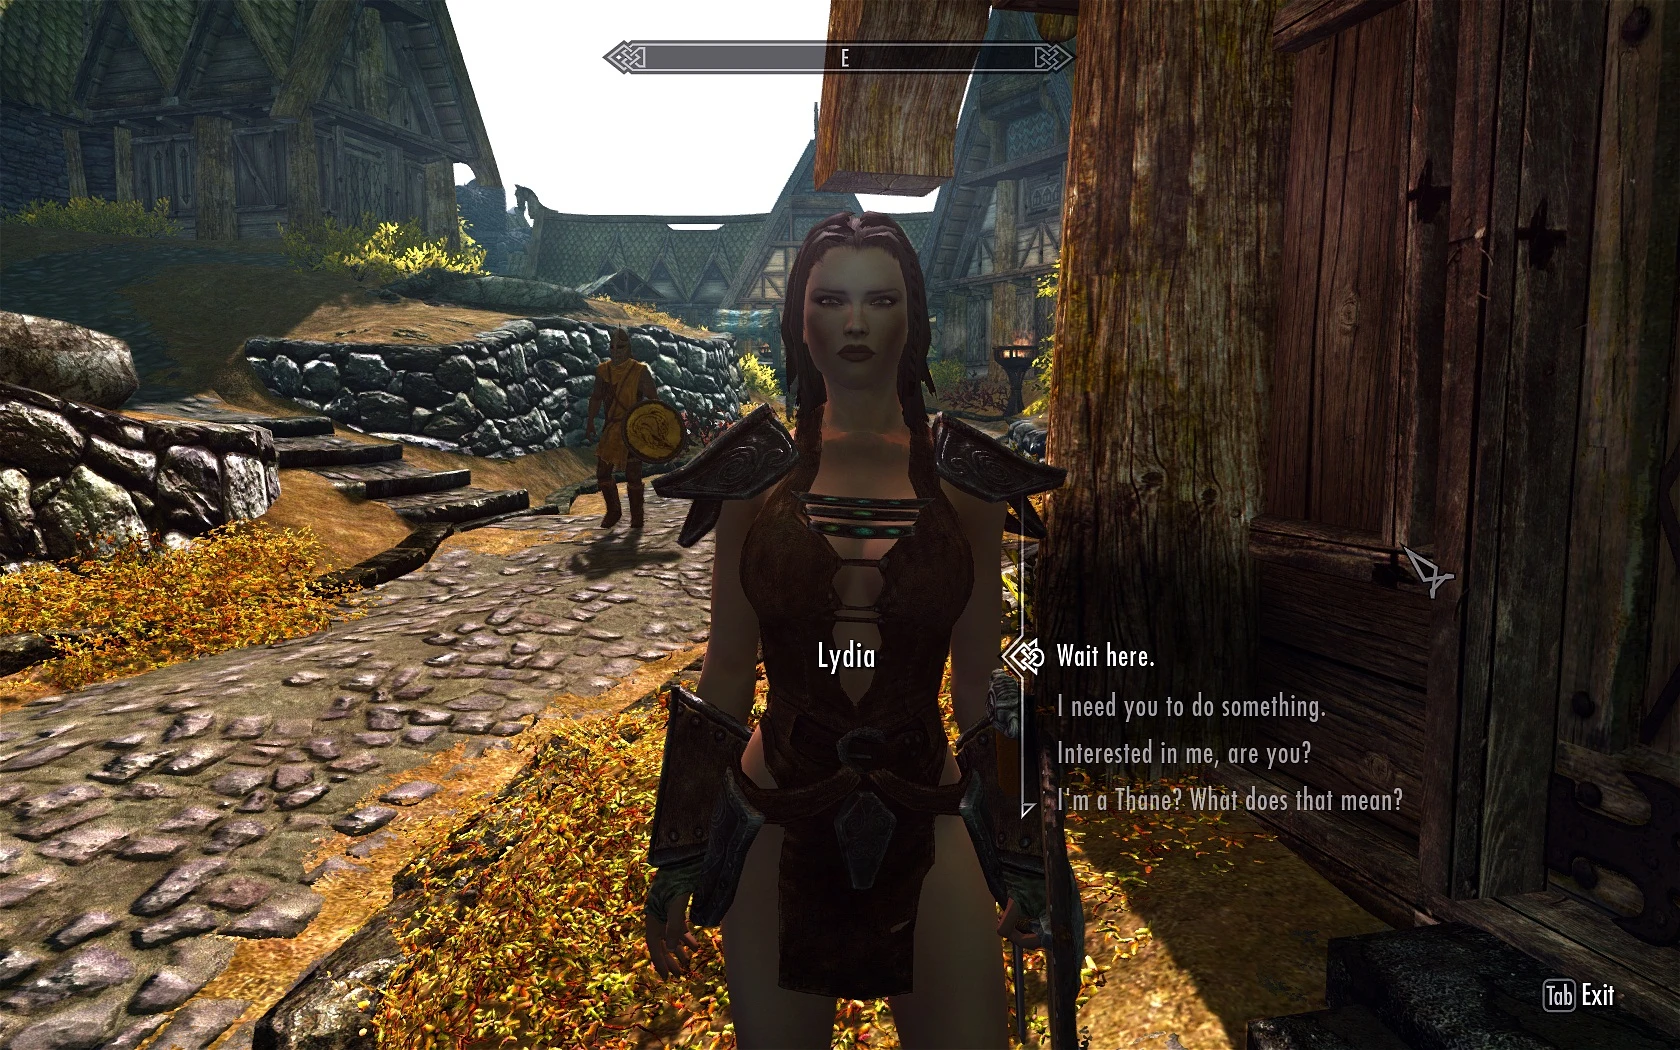 Lydia Marriage Fixed And More At Skyrim Nexus Mods.